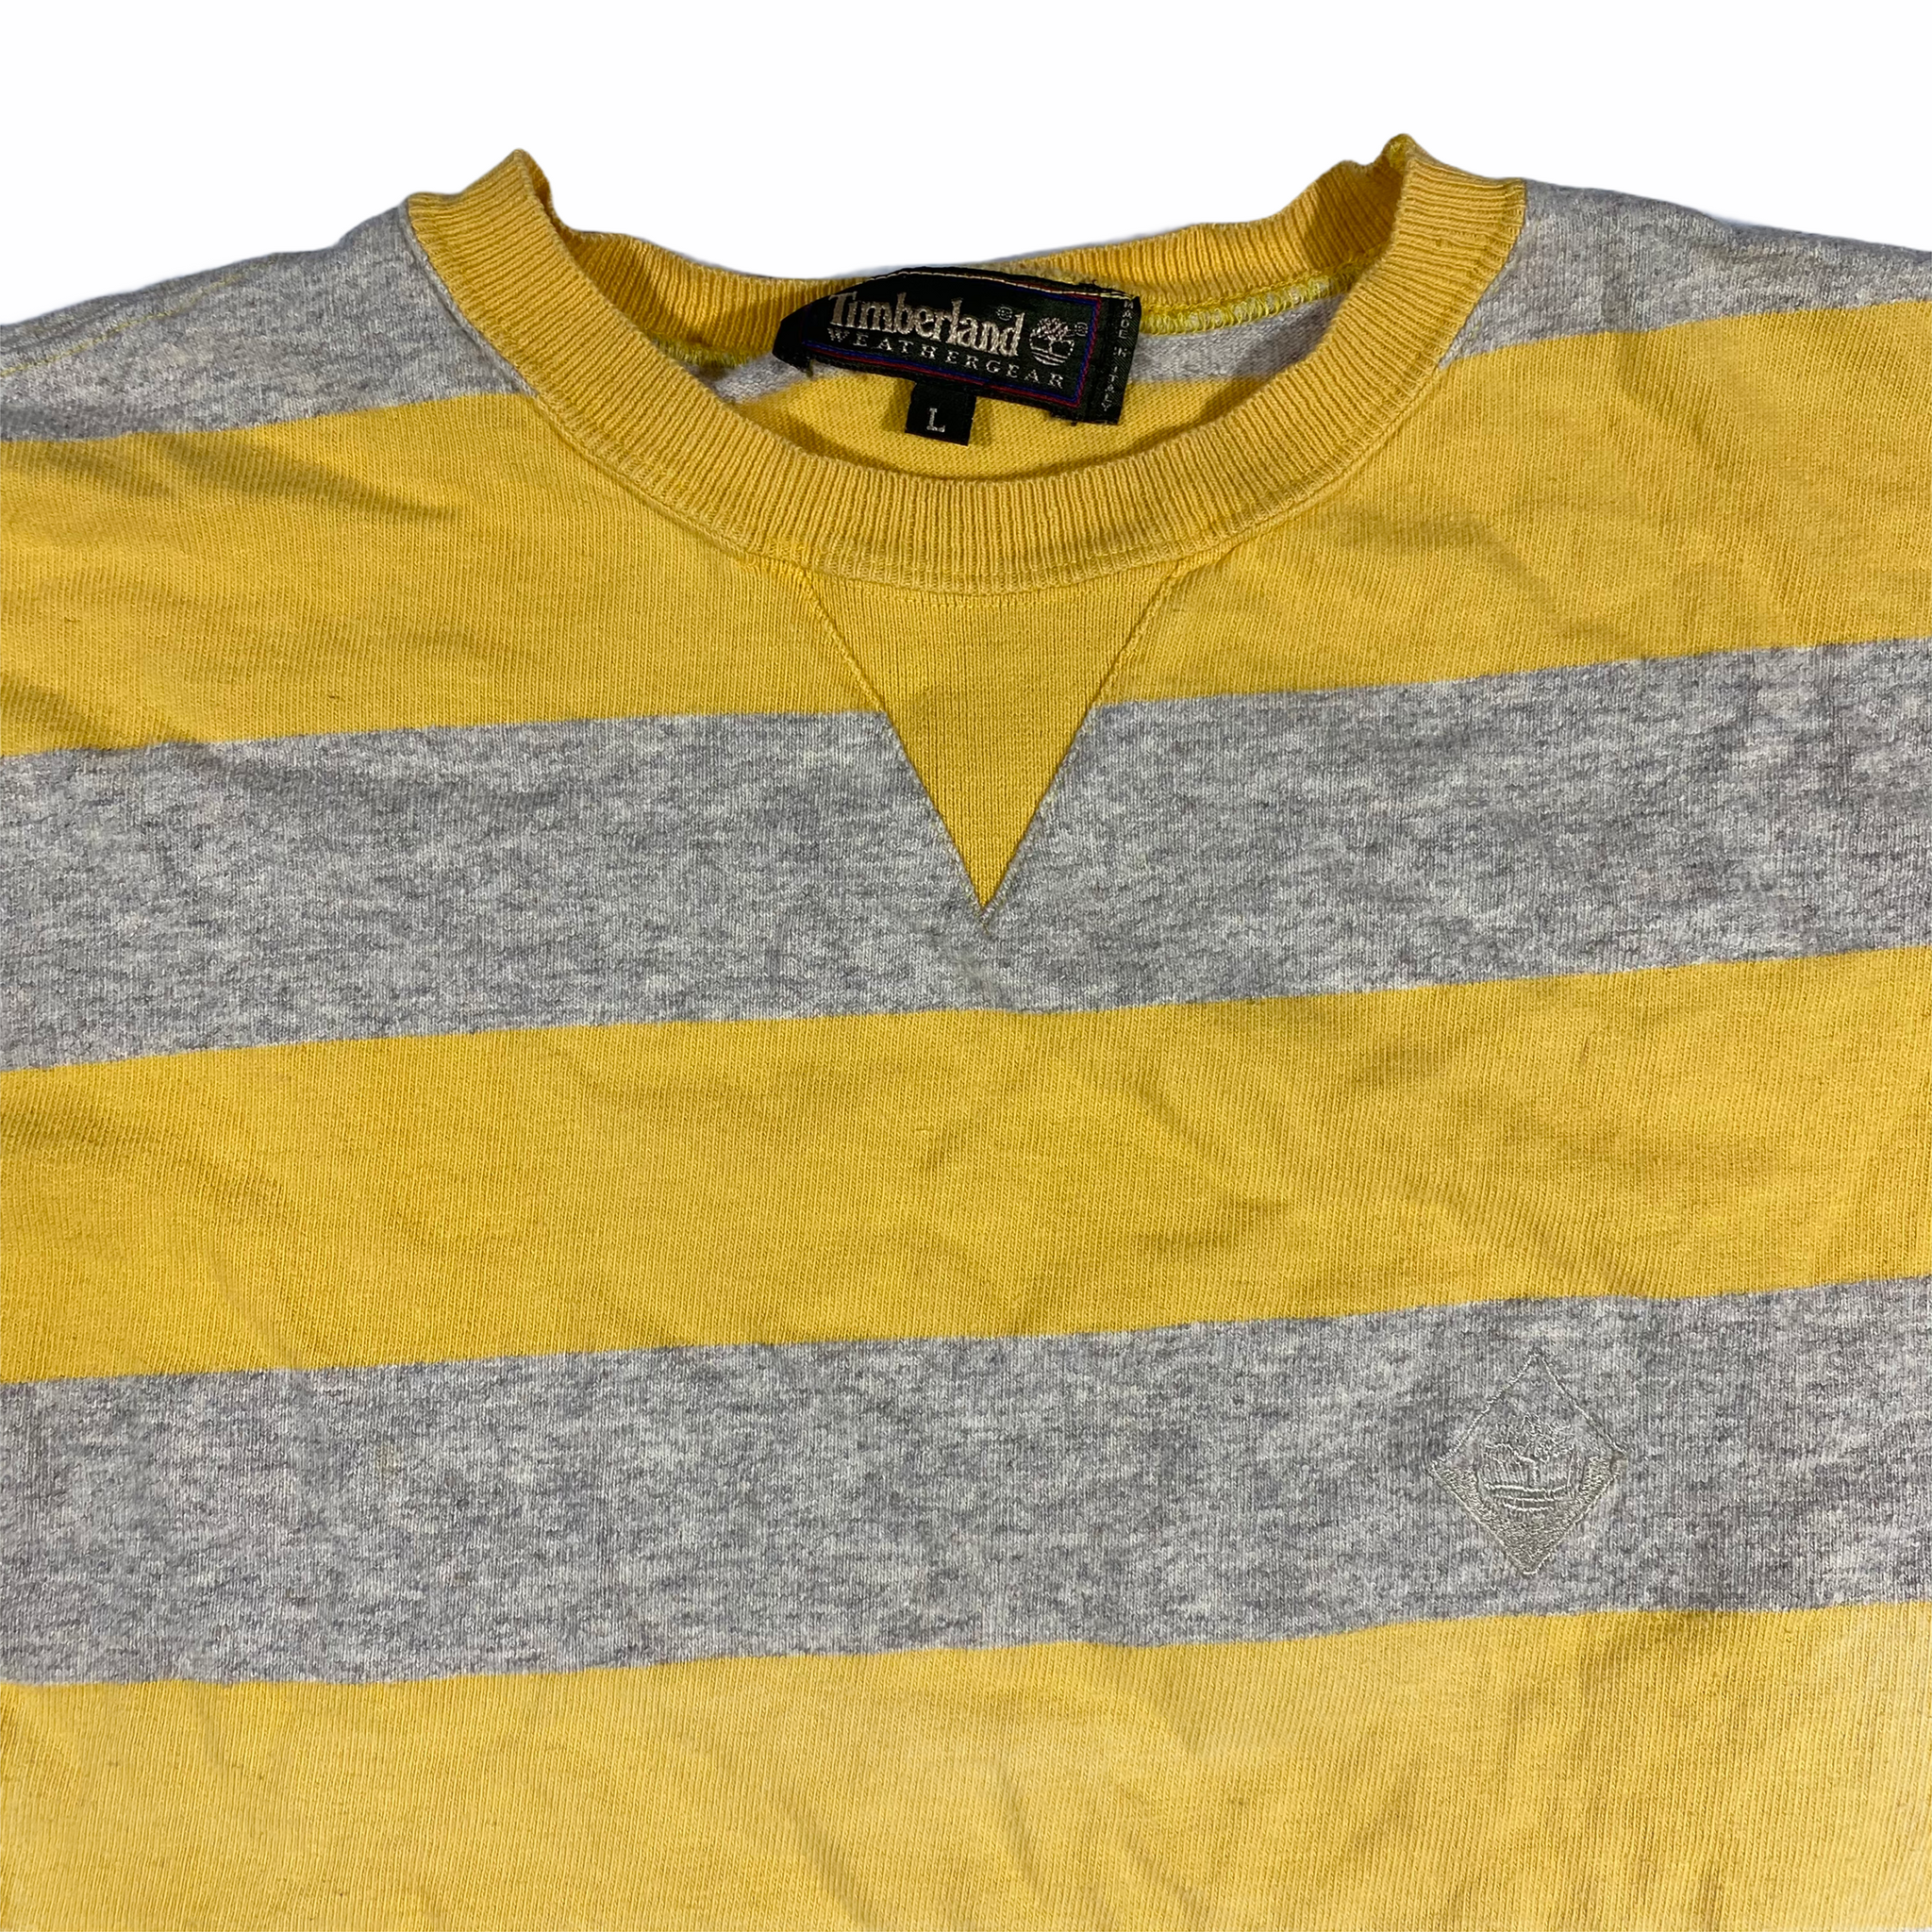 90s Timberland striped tee large